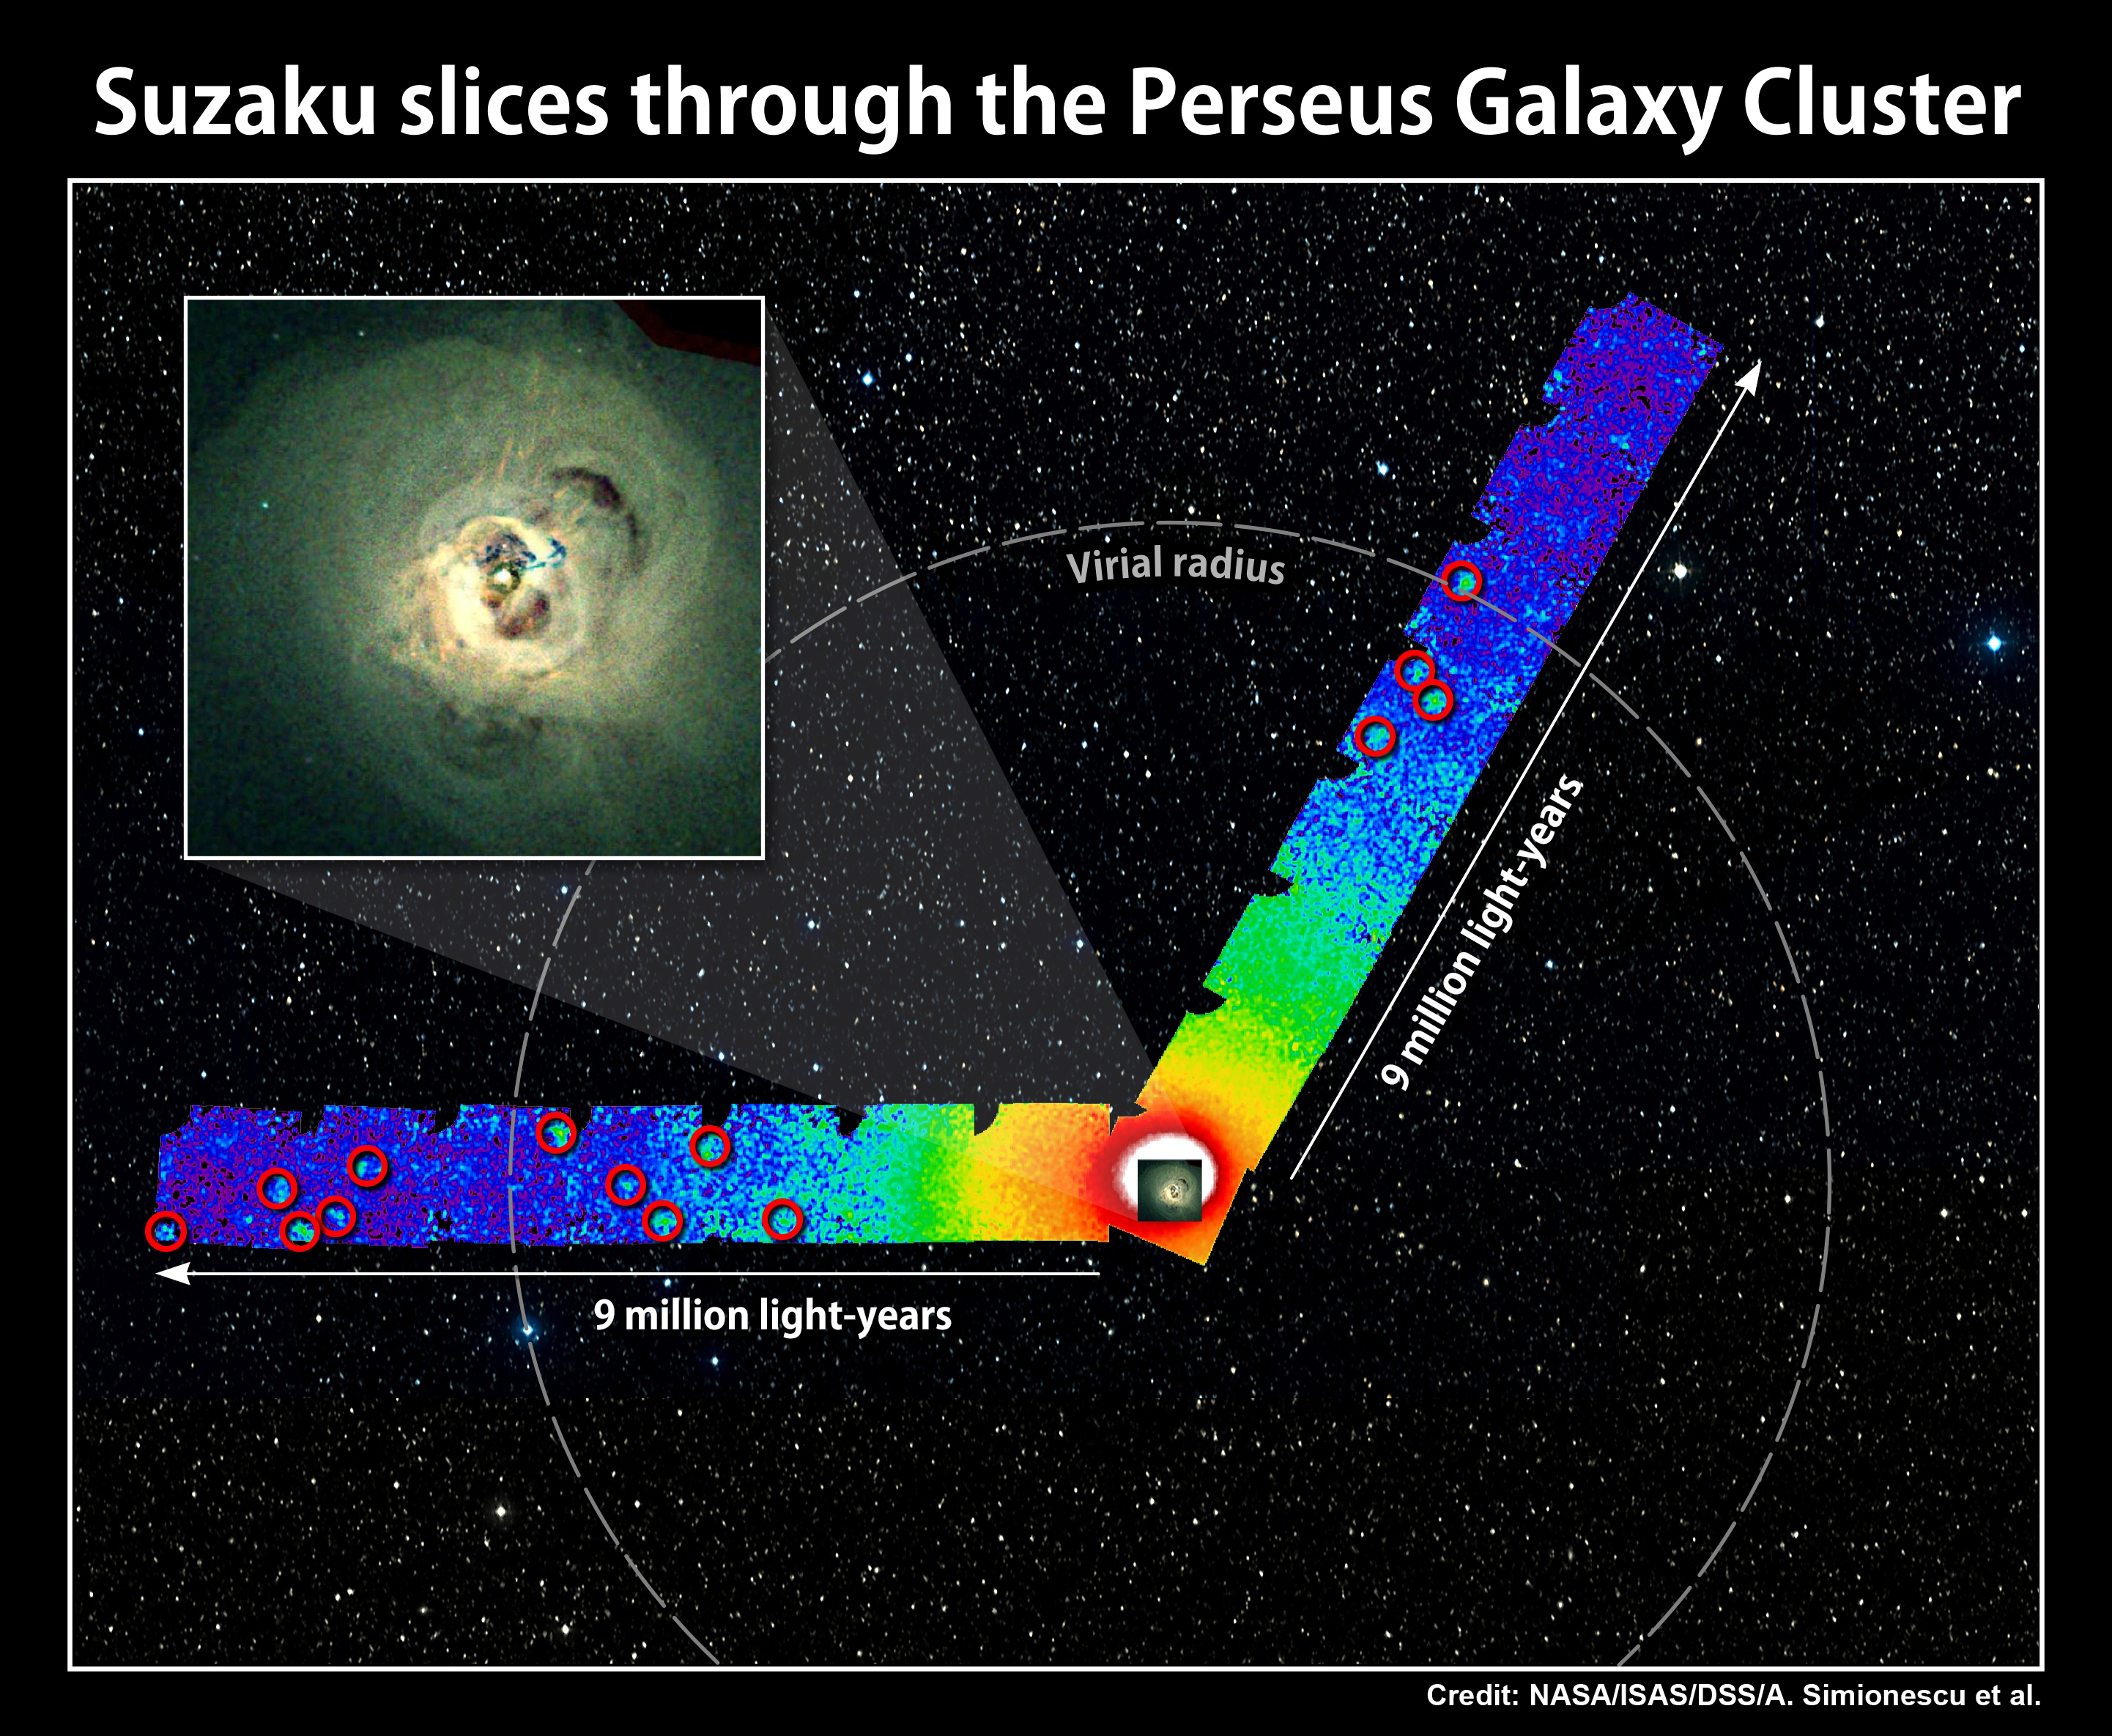 Suzaku observations of the Perseus cluster